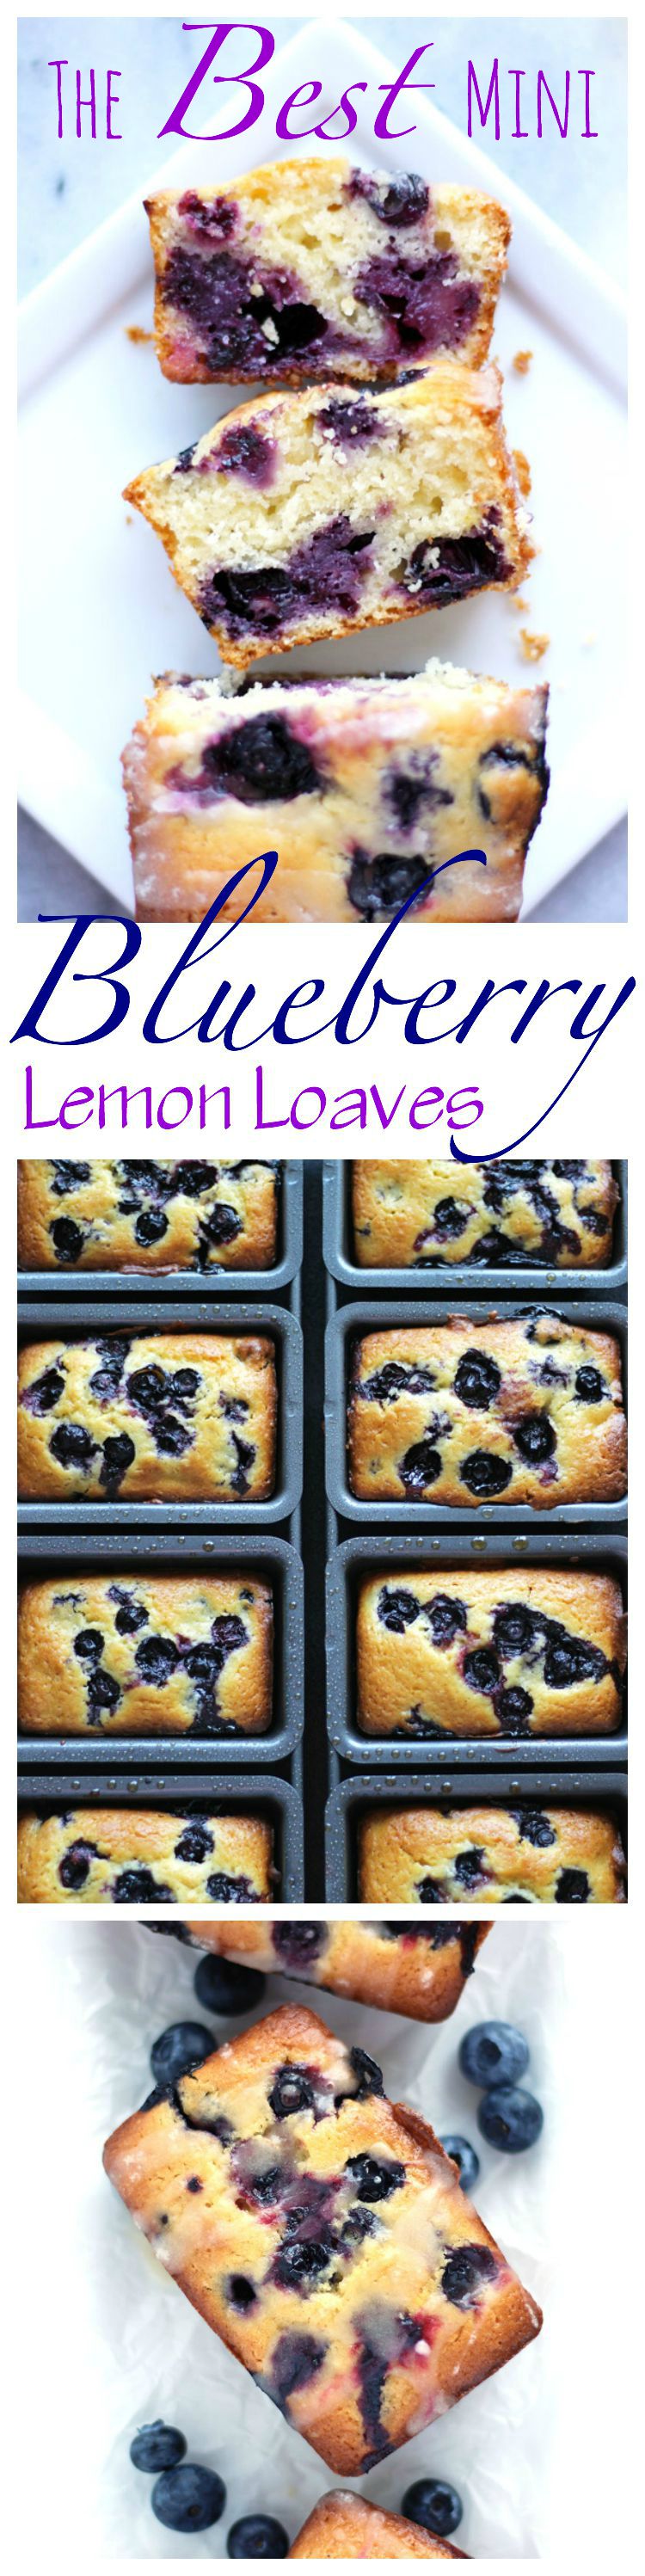 The Best Mini Blueberry Lemon Loaves. These Loaves are deliciously intertwined with blueberries with a subtle lemon flavor and a the sweetest glaze. NeuroticMommy.com